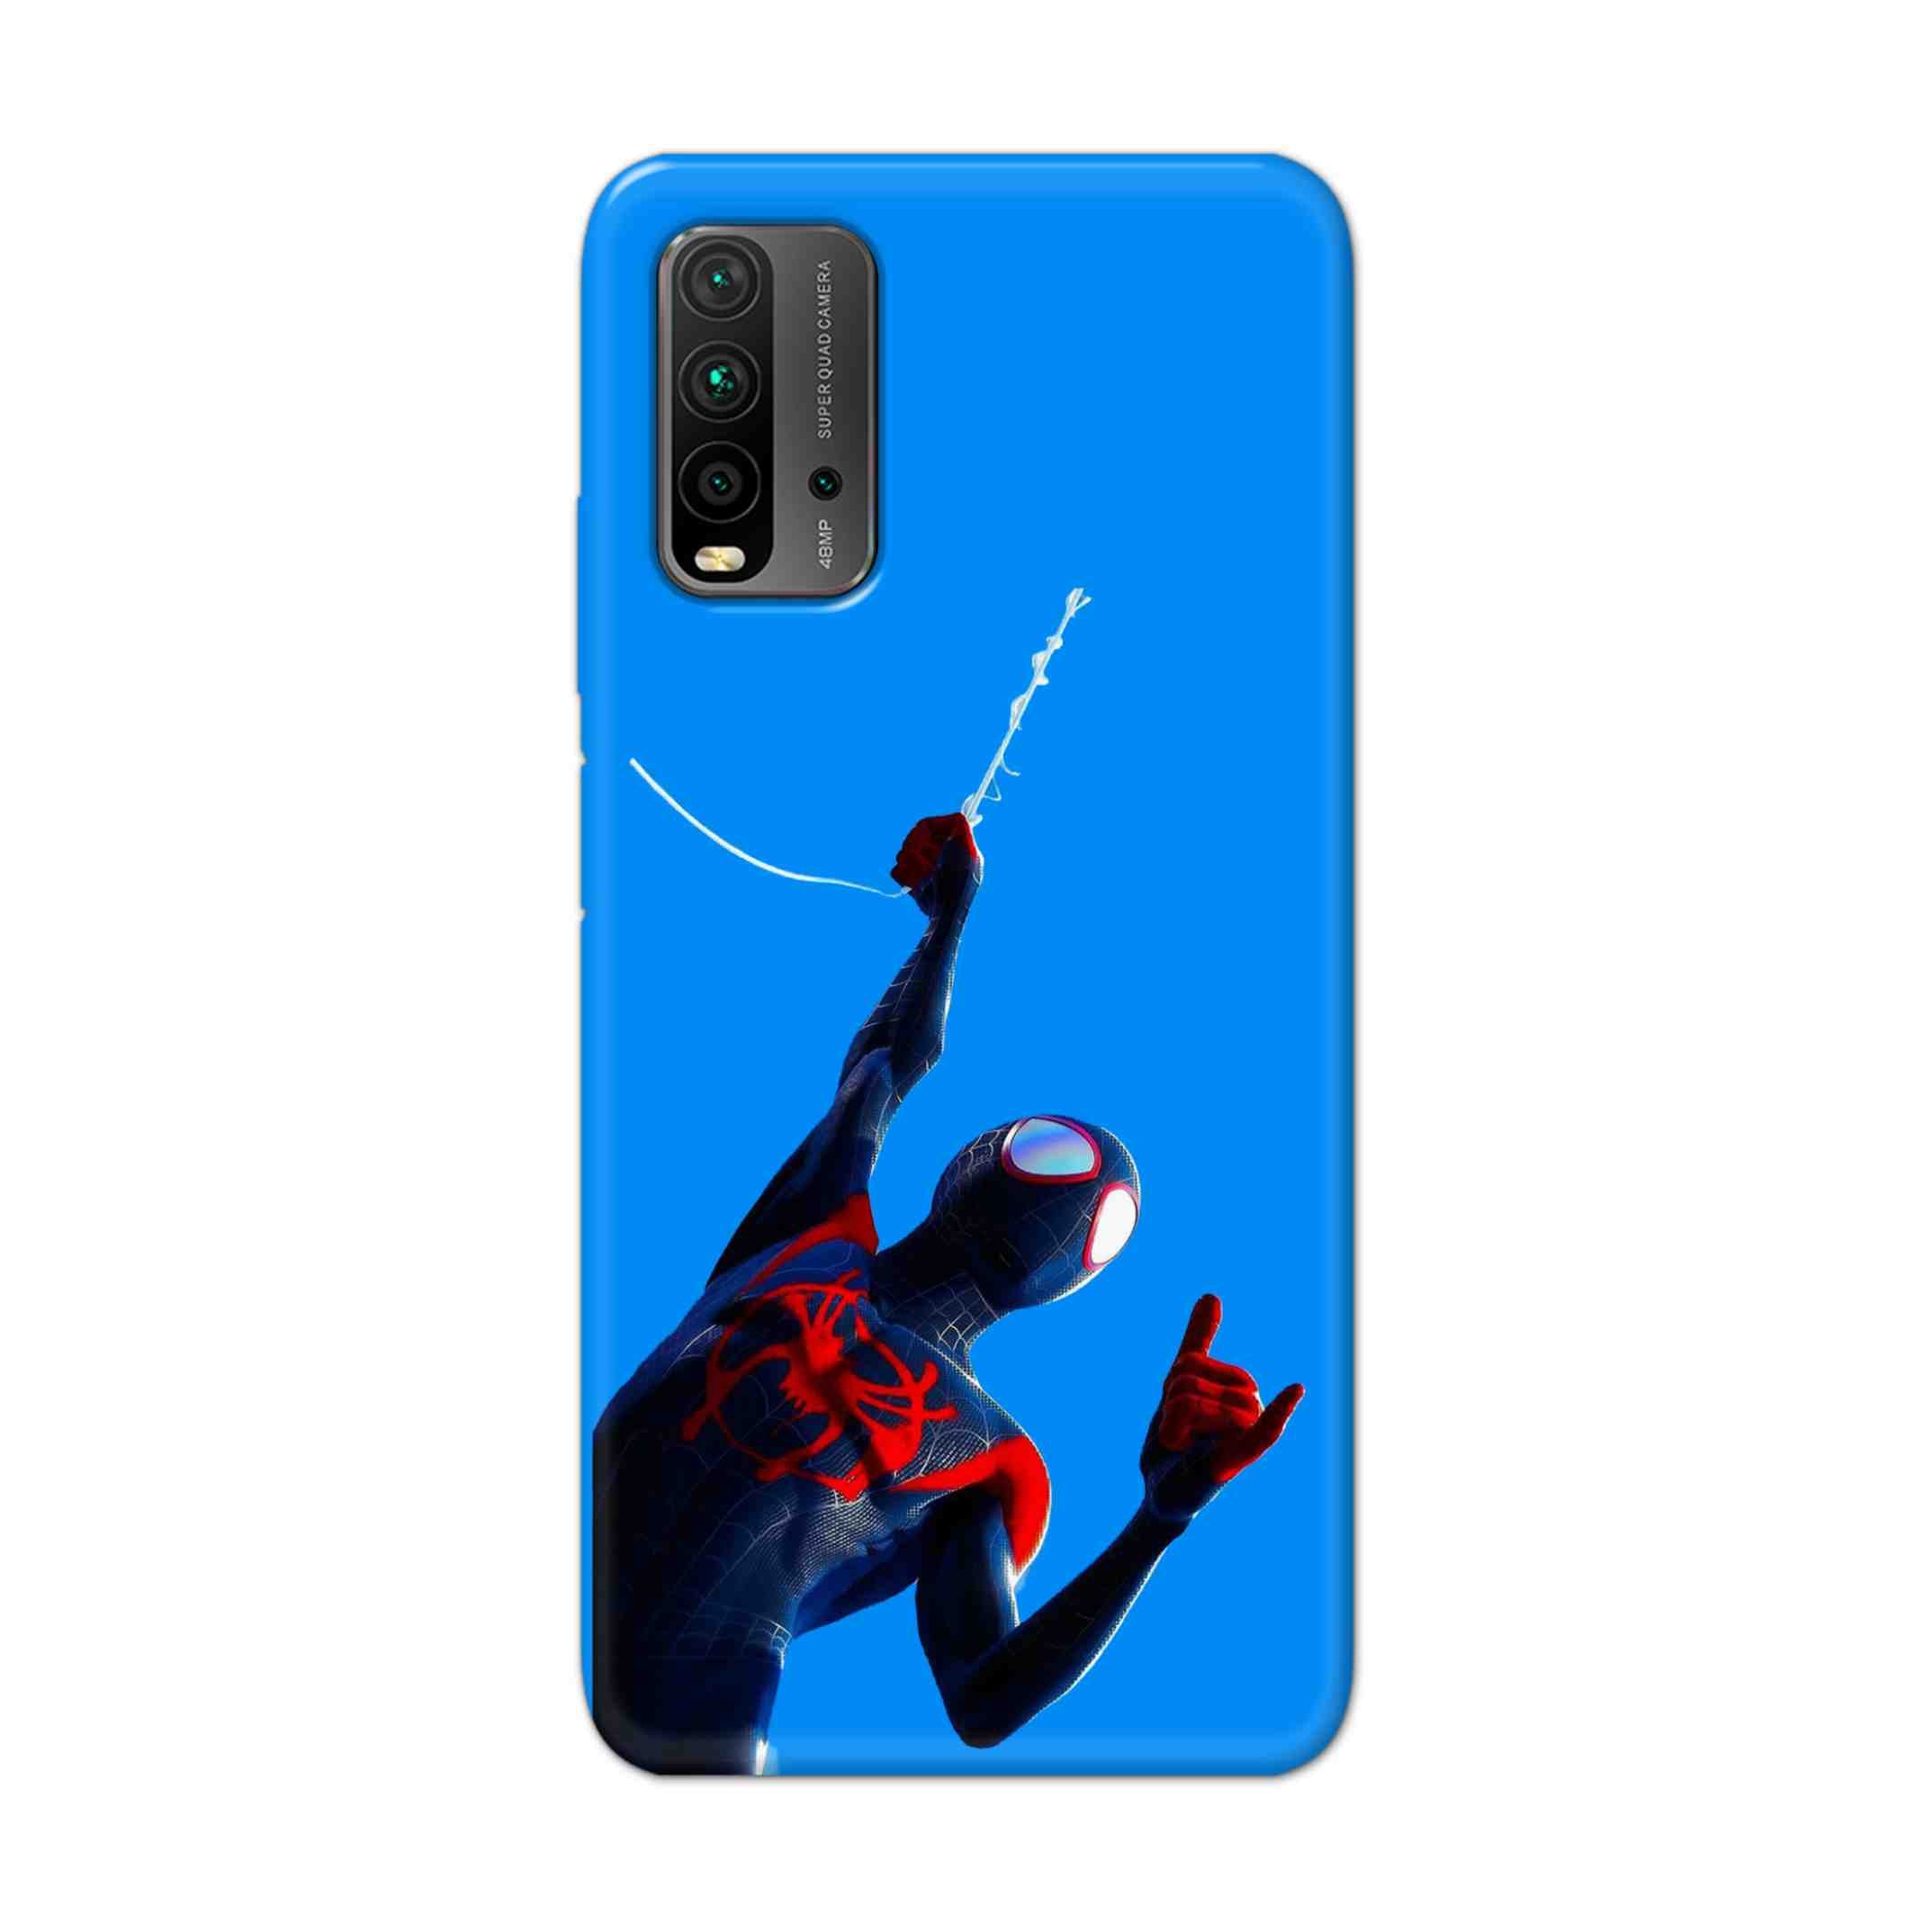 Buy Miles Morales Spiderman Hard Back Mobile Phone Case Cover For Redmi 9 Power Online